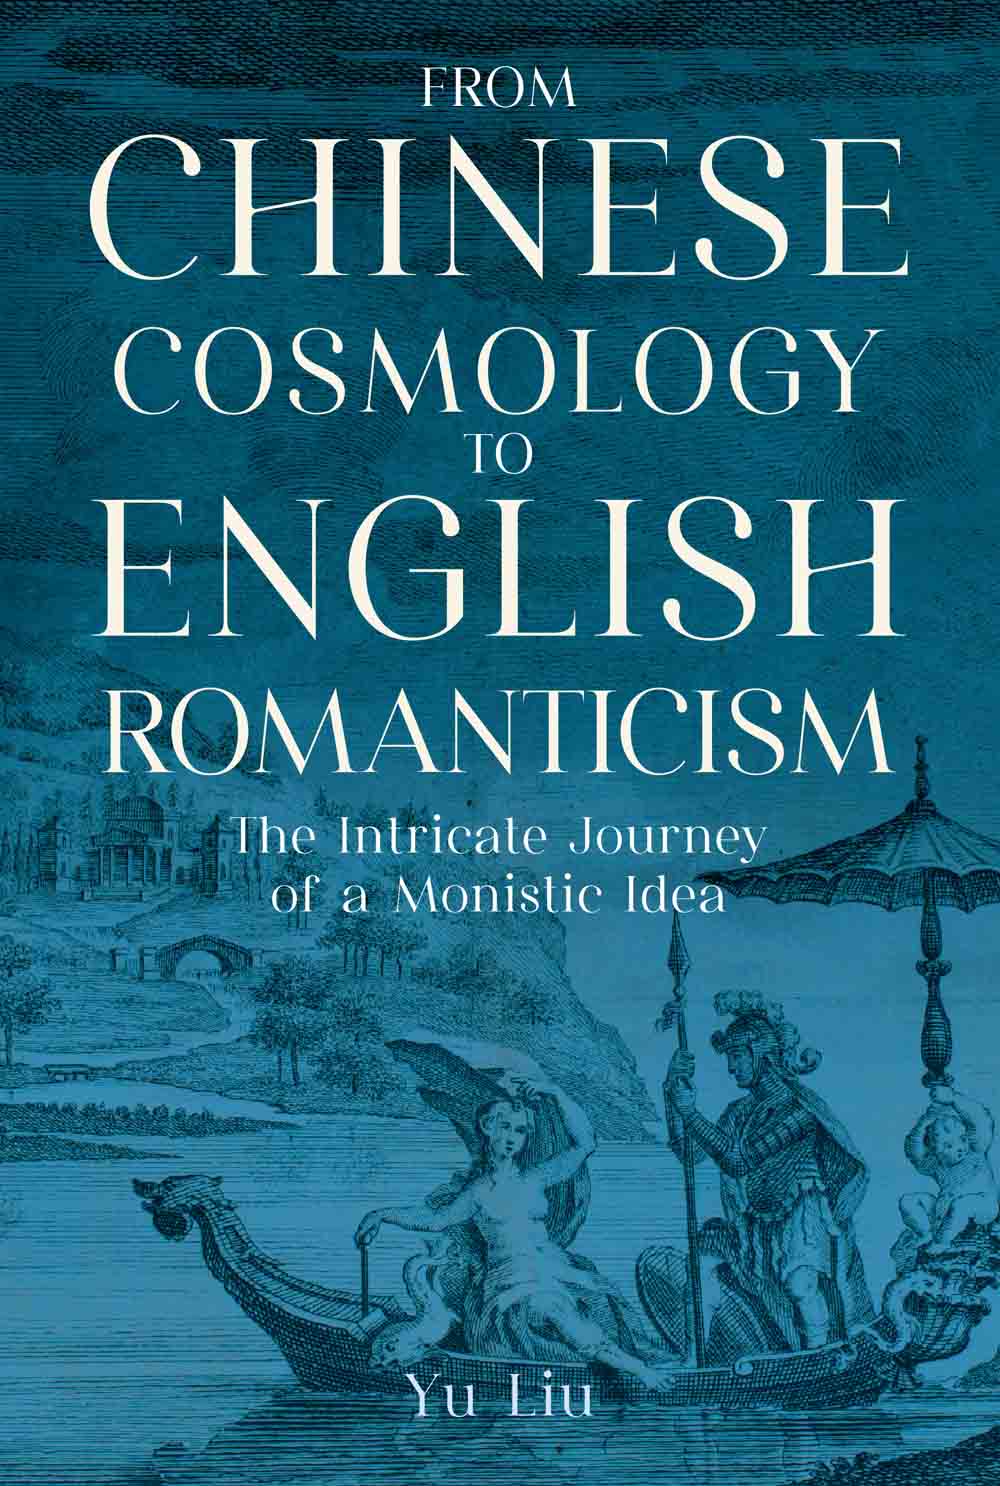 From Chinese Cosmology to English Romanticism: The Intricate Journey of a Monistic Idea（從中國文化到英國浪漫主義詩歌 ──天人合一概念的轉移歷程）